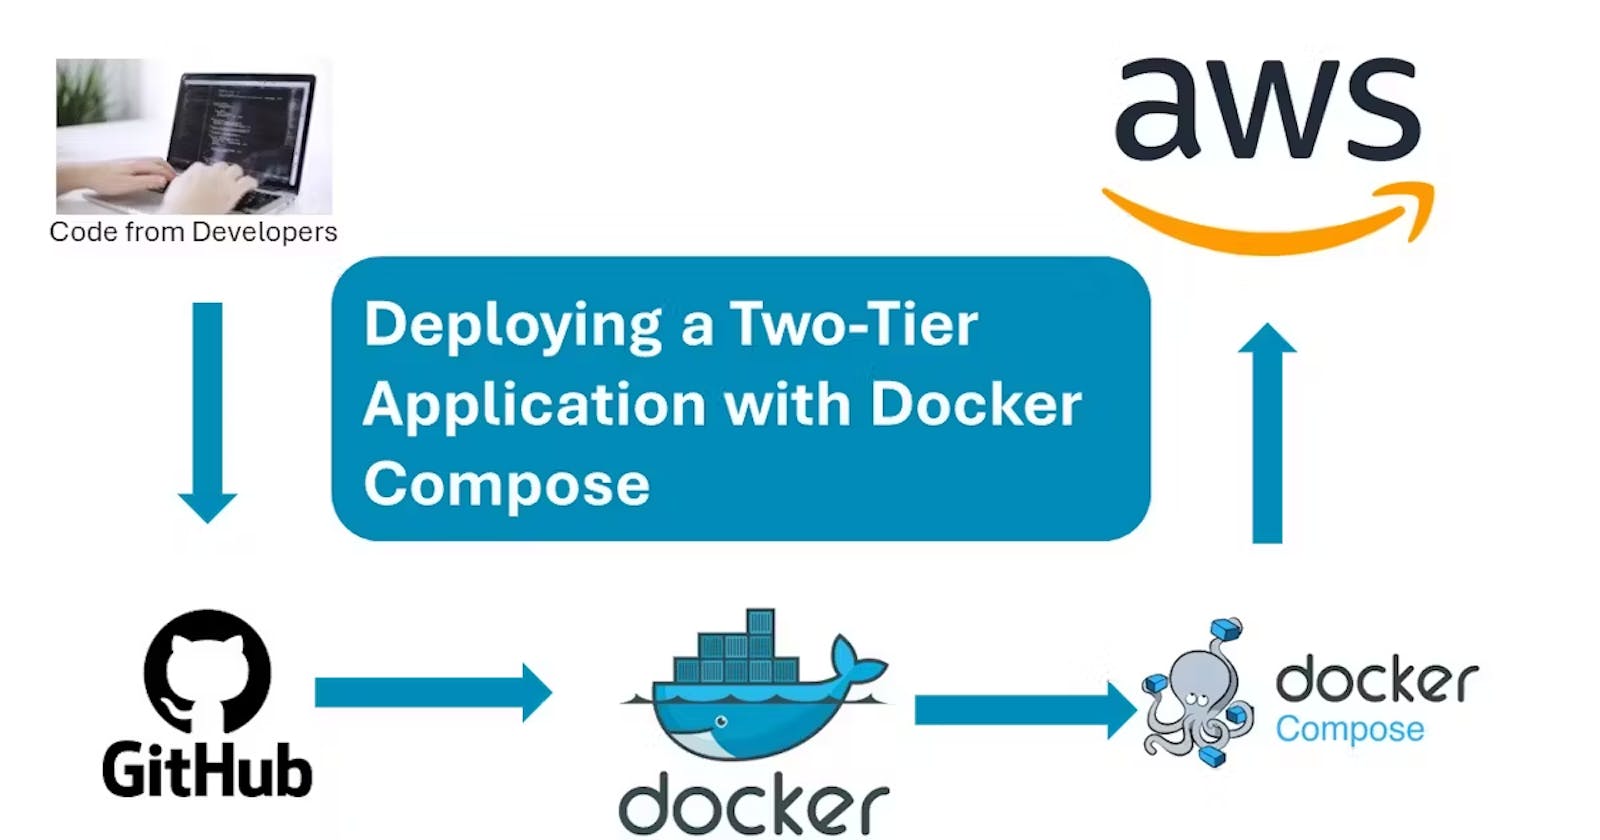 🥈Two-tier application using Docker, Docker compose, and image scanning with Docker Scout.